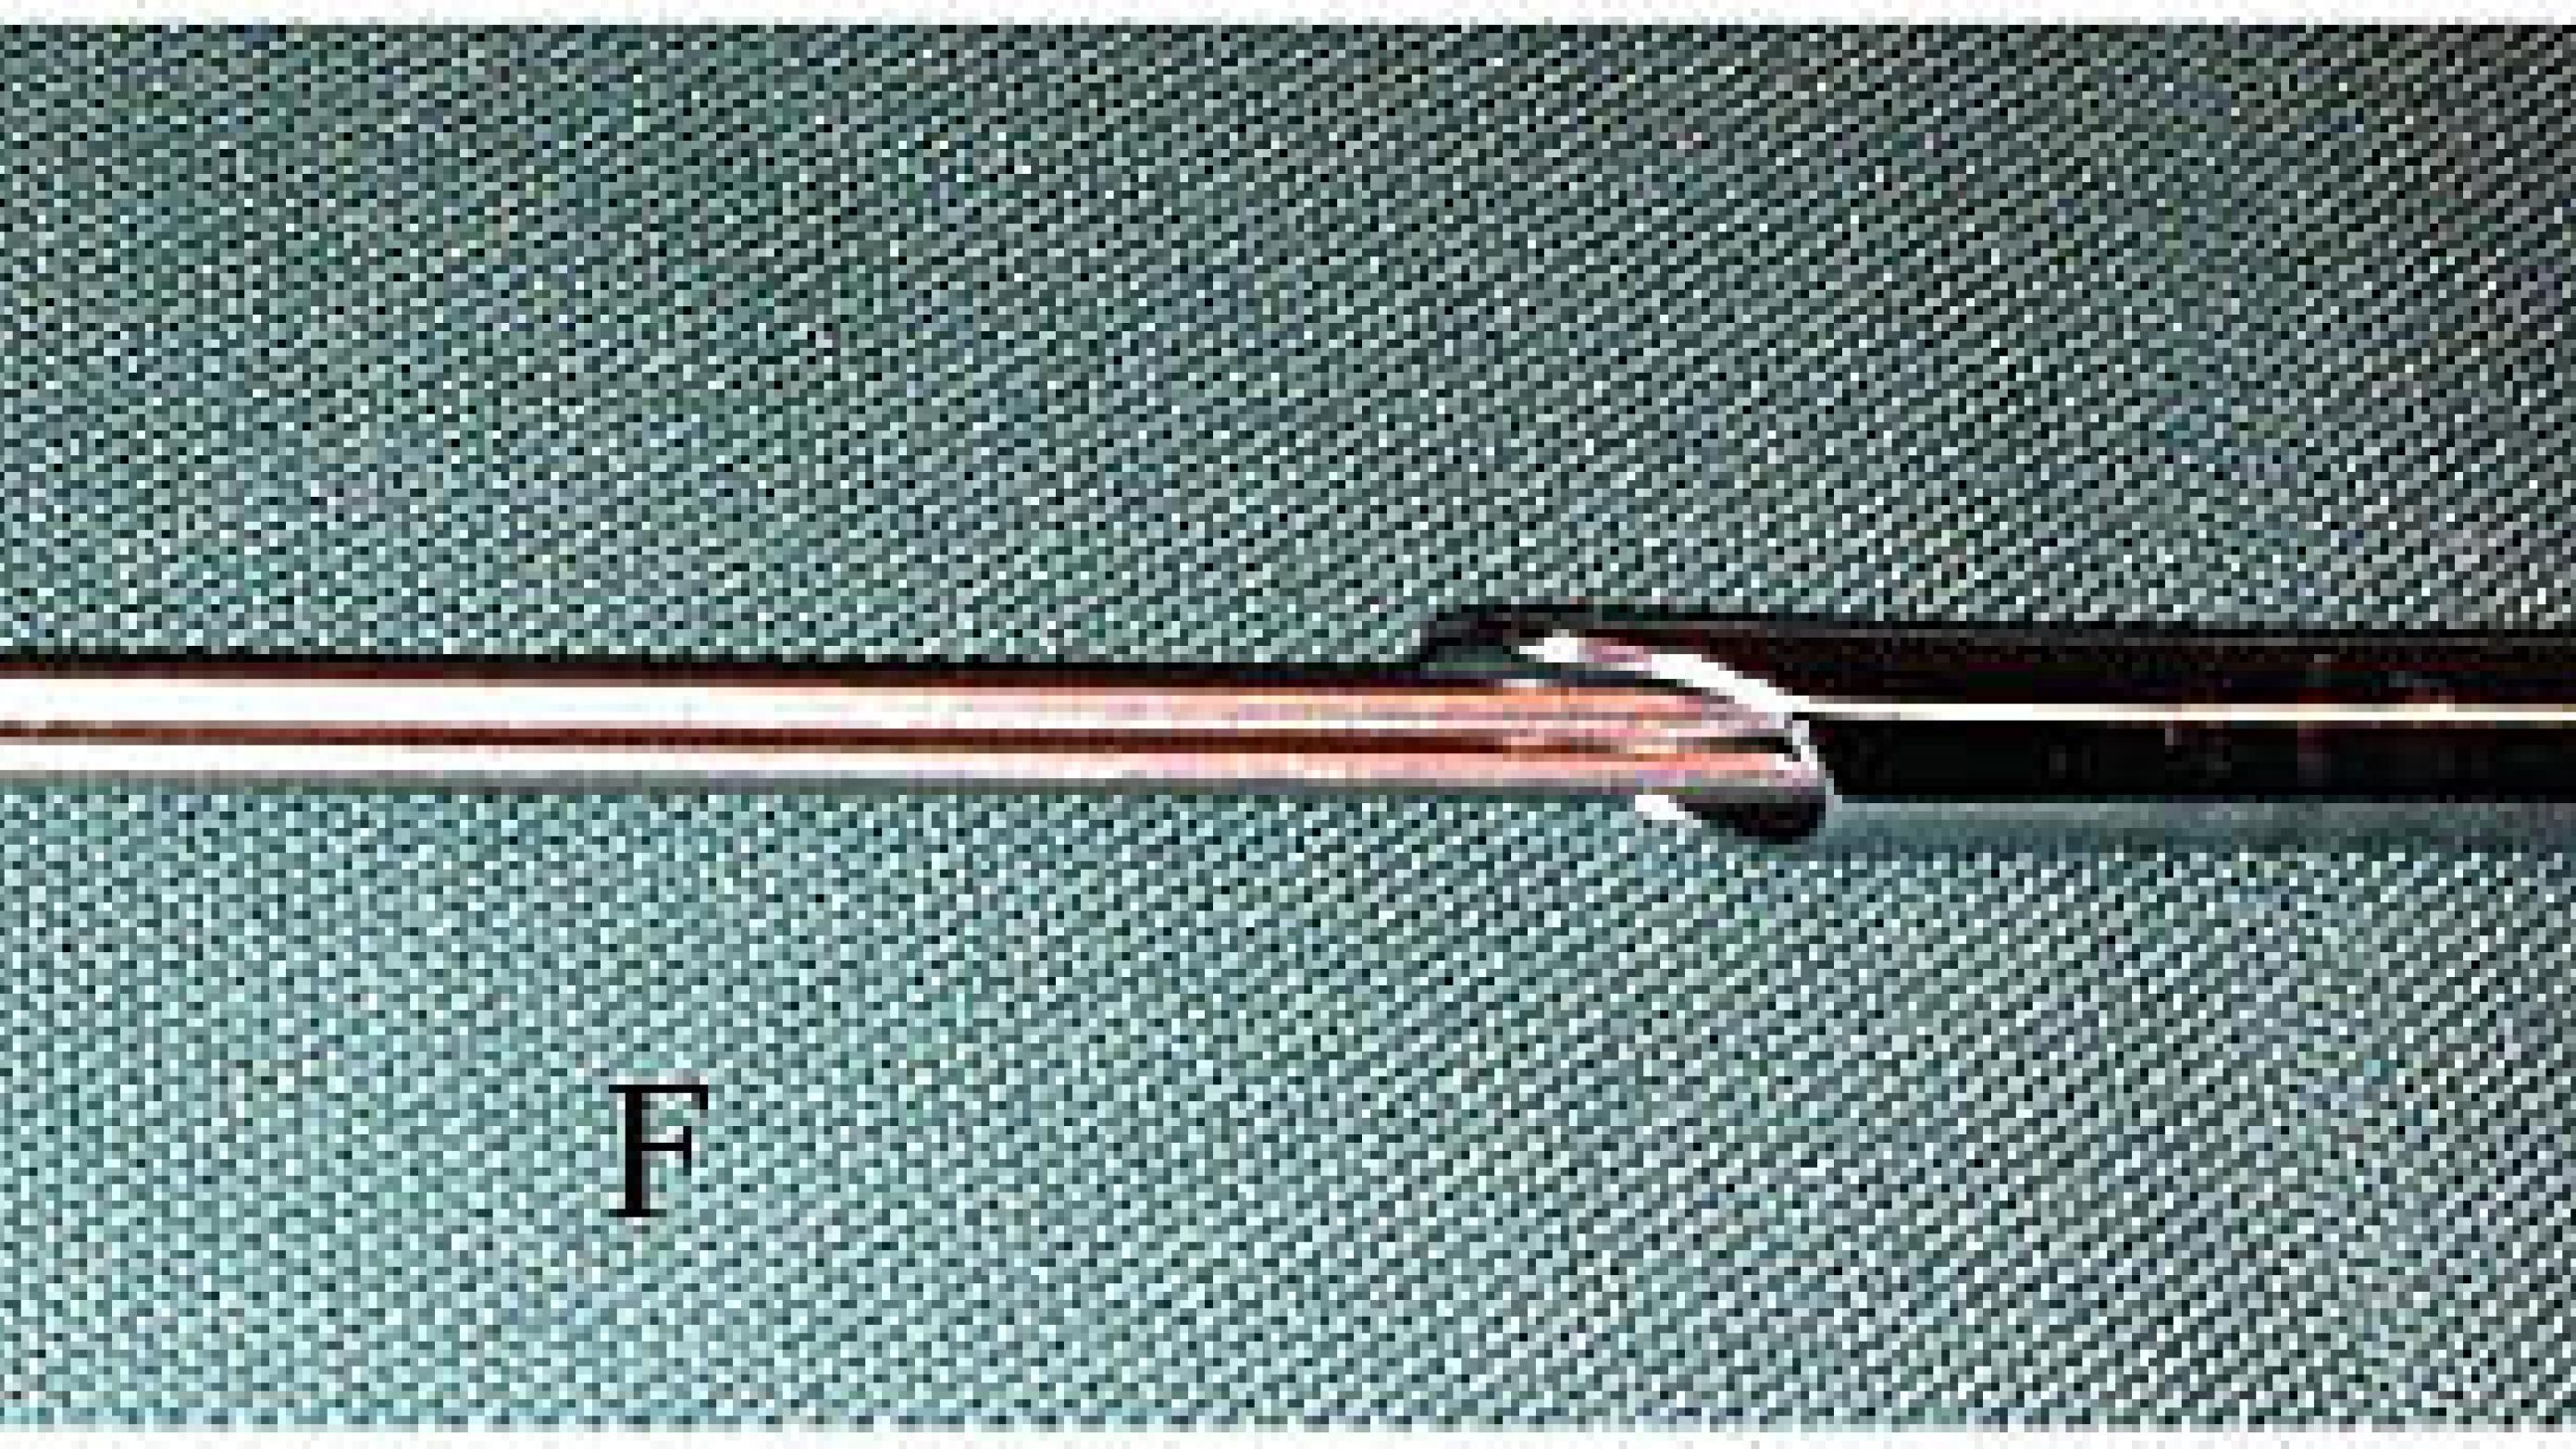 An optical forceps (F) is passed through the rigid bronchoscope (B) to firmly grab a piece of almond (A). The forceps and the rigid bronchoscope can then be removed simultaneously from the respiratory tract whereby the foreign body is removed.